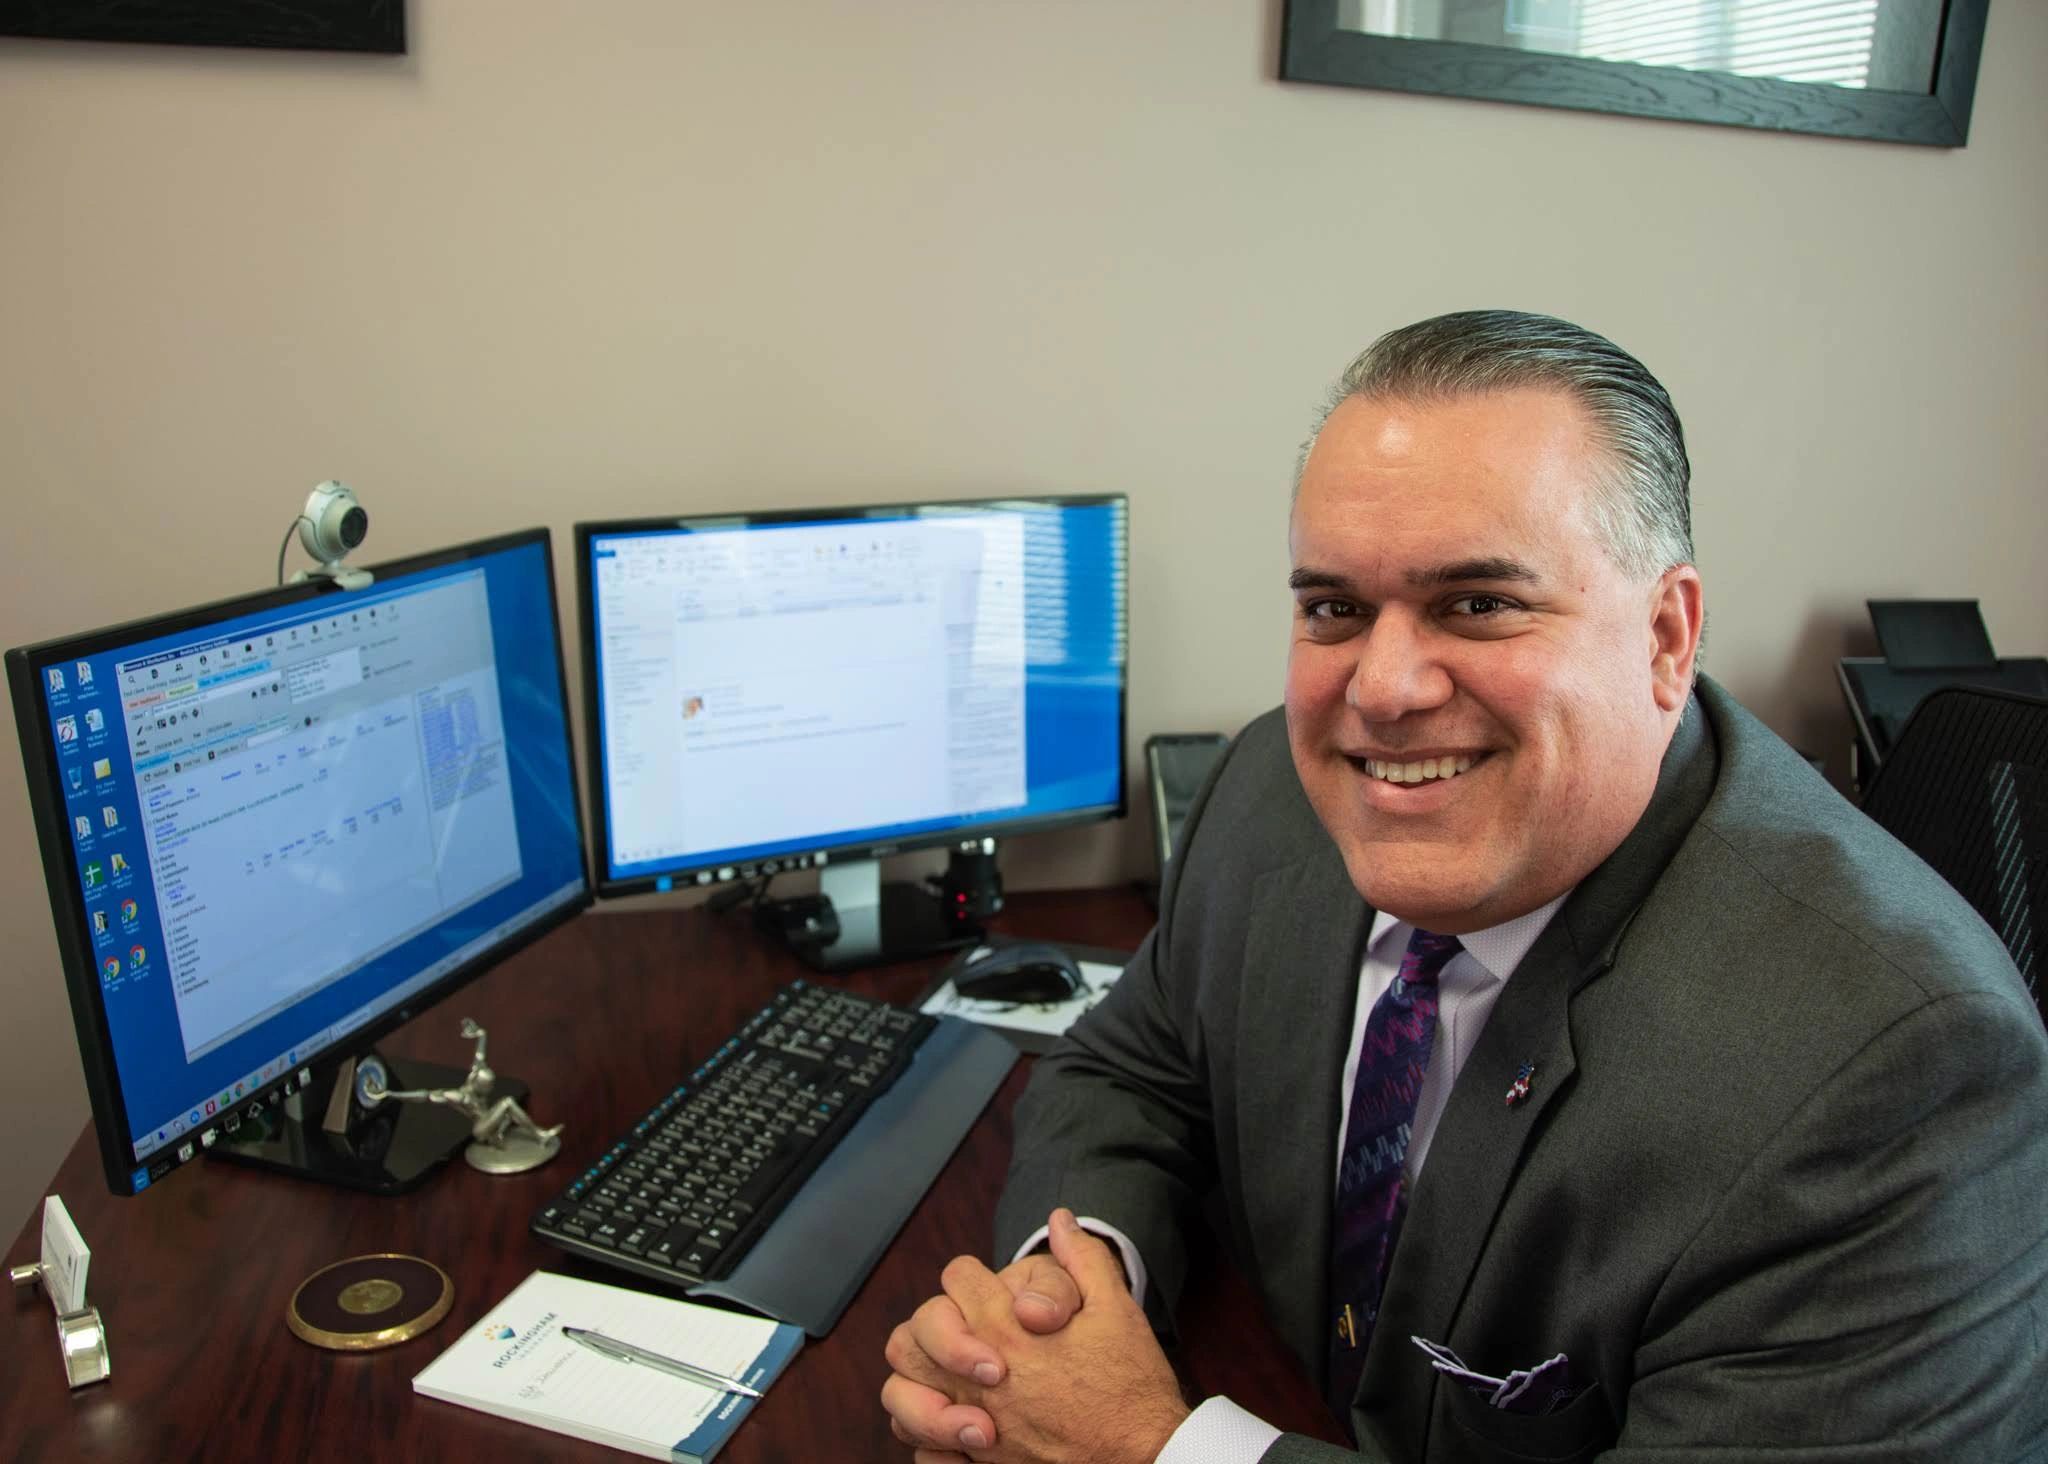 Bob Oveissi at Work: Smiling Insurance Broker, Focused on Hard Work w/ Double Monitor Computer Setup